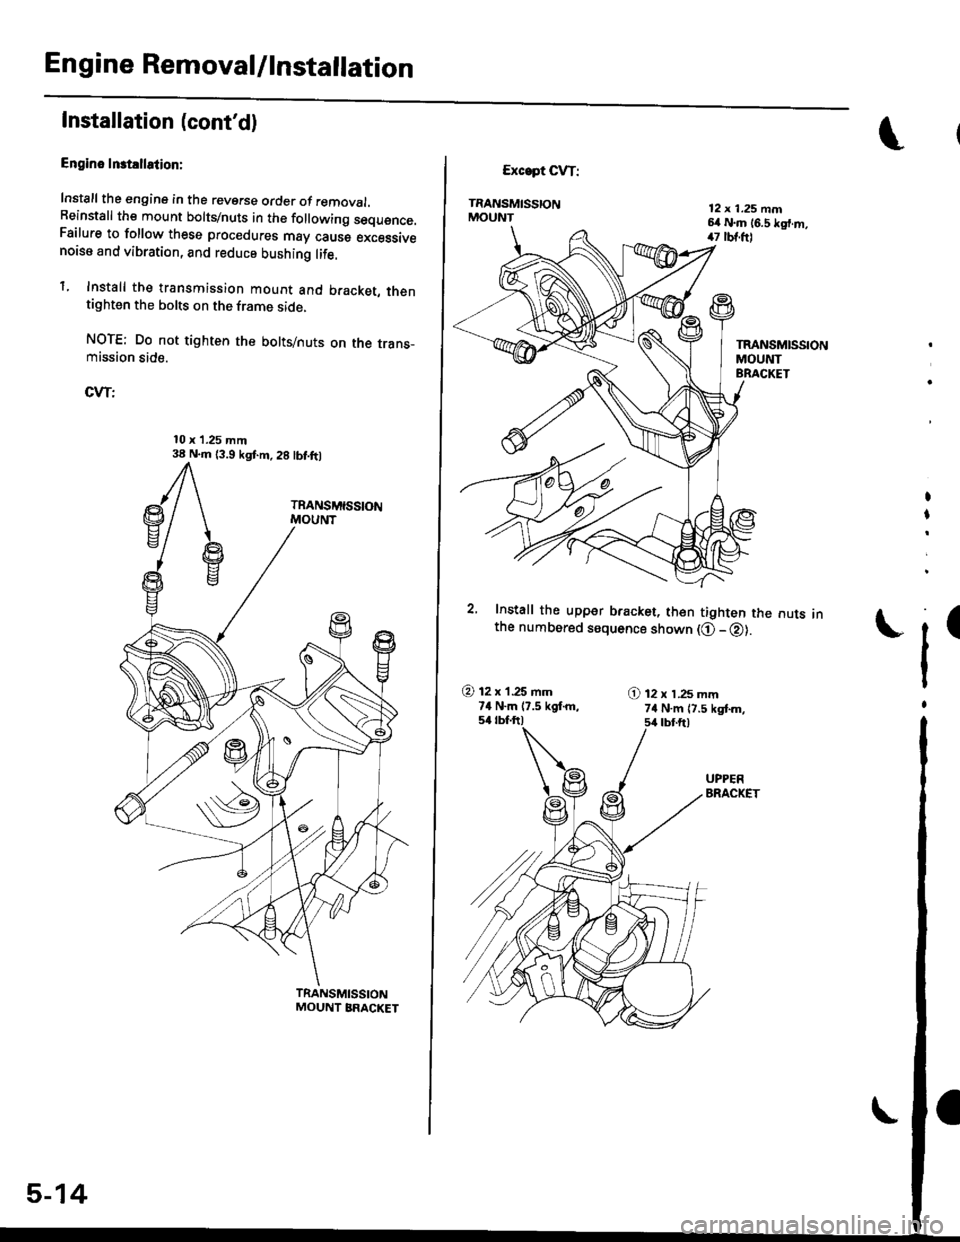 HONDA CIVIC 1997 6.G Workshop Manual Engine Removal/lnstallation
Installation (contd)
Engino Inst!llation:
Install the engine in the reverse order of removal.Beinstall the mount bolts/nuts in the following sequence.Failure to follow the